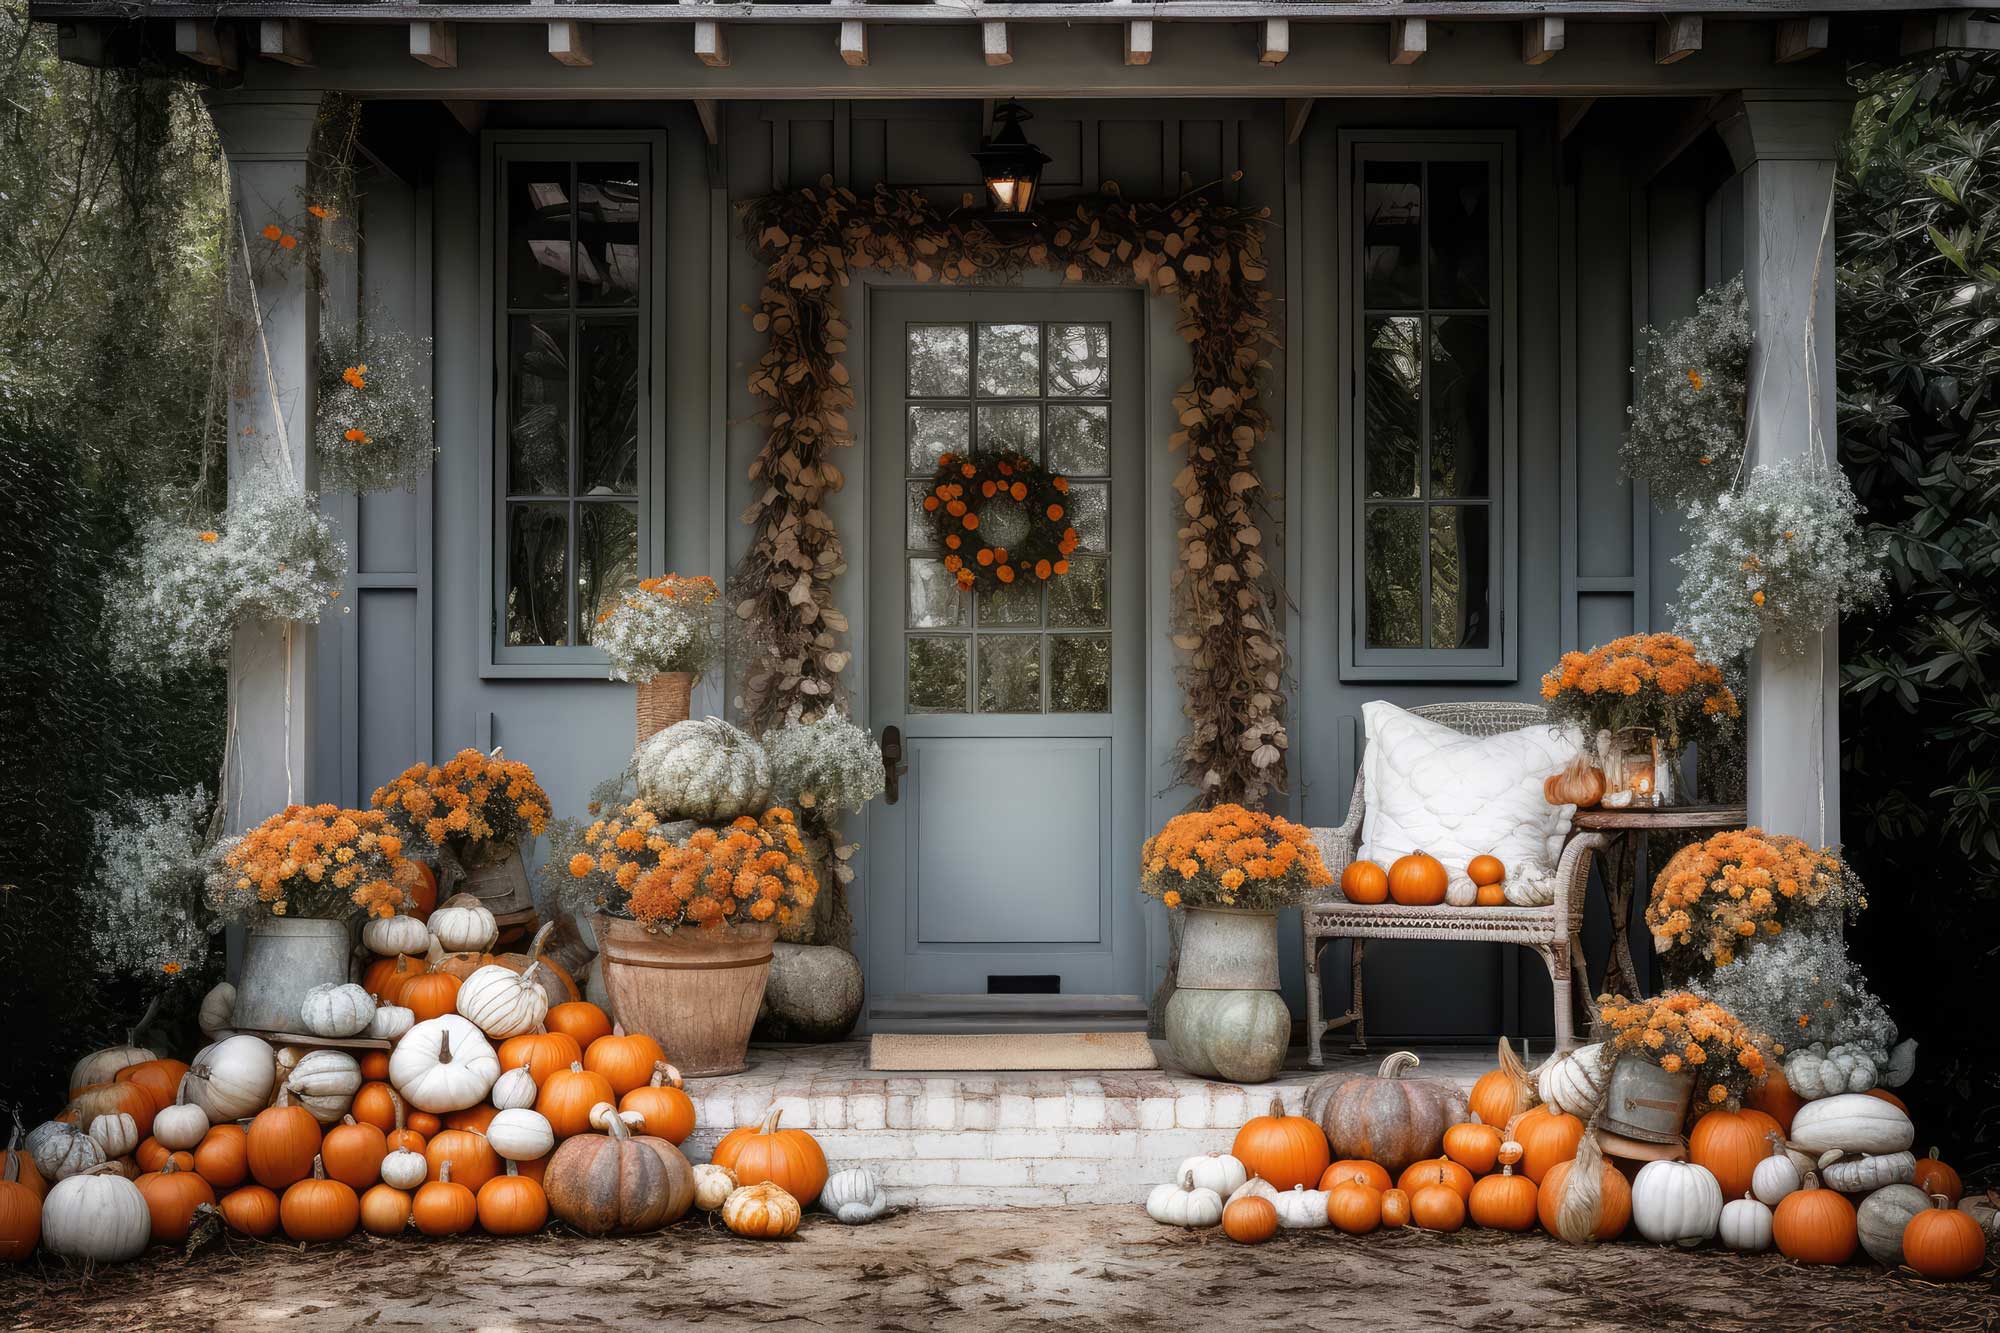 Door with glass panels surrounded by fall decor